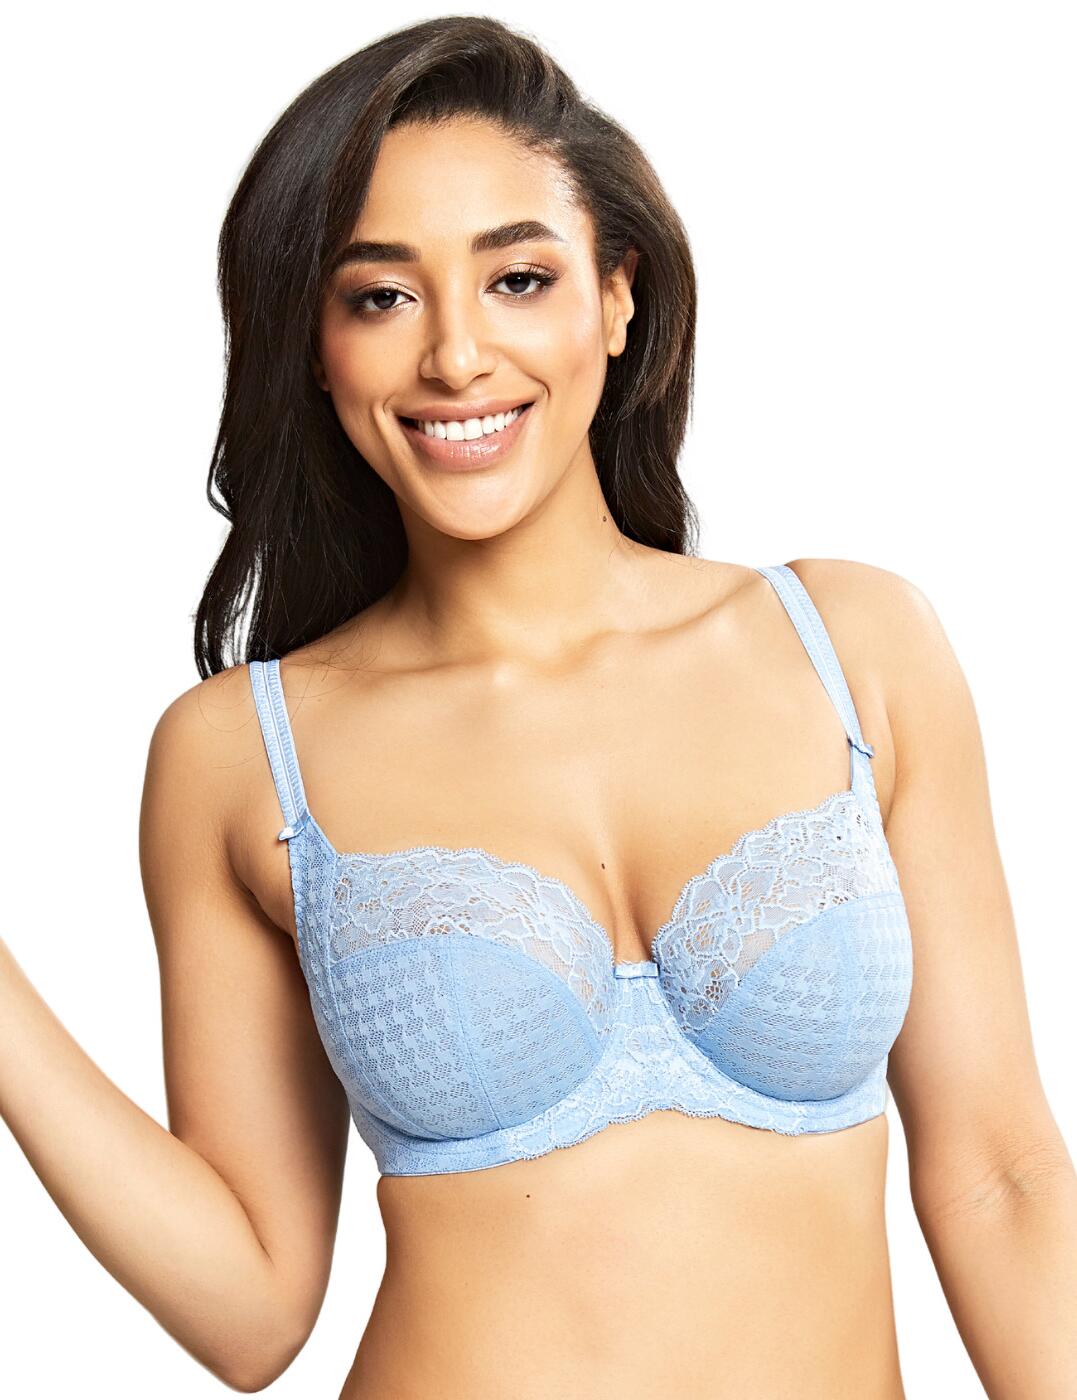 Panache Envy Full Cup Bra Underwired Non-Padded Ladies Lace